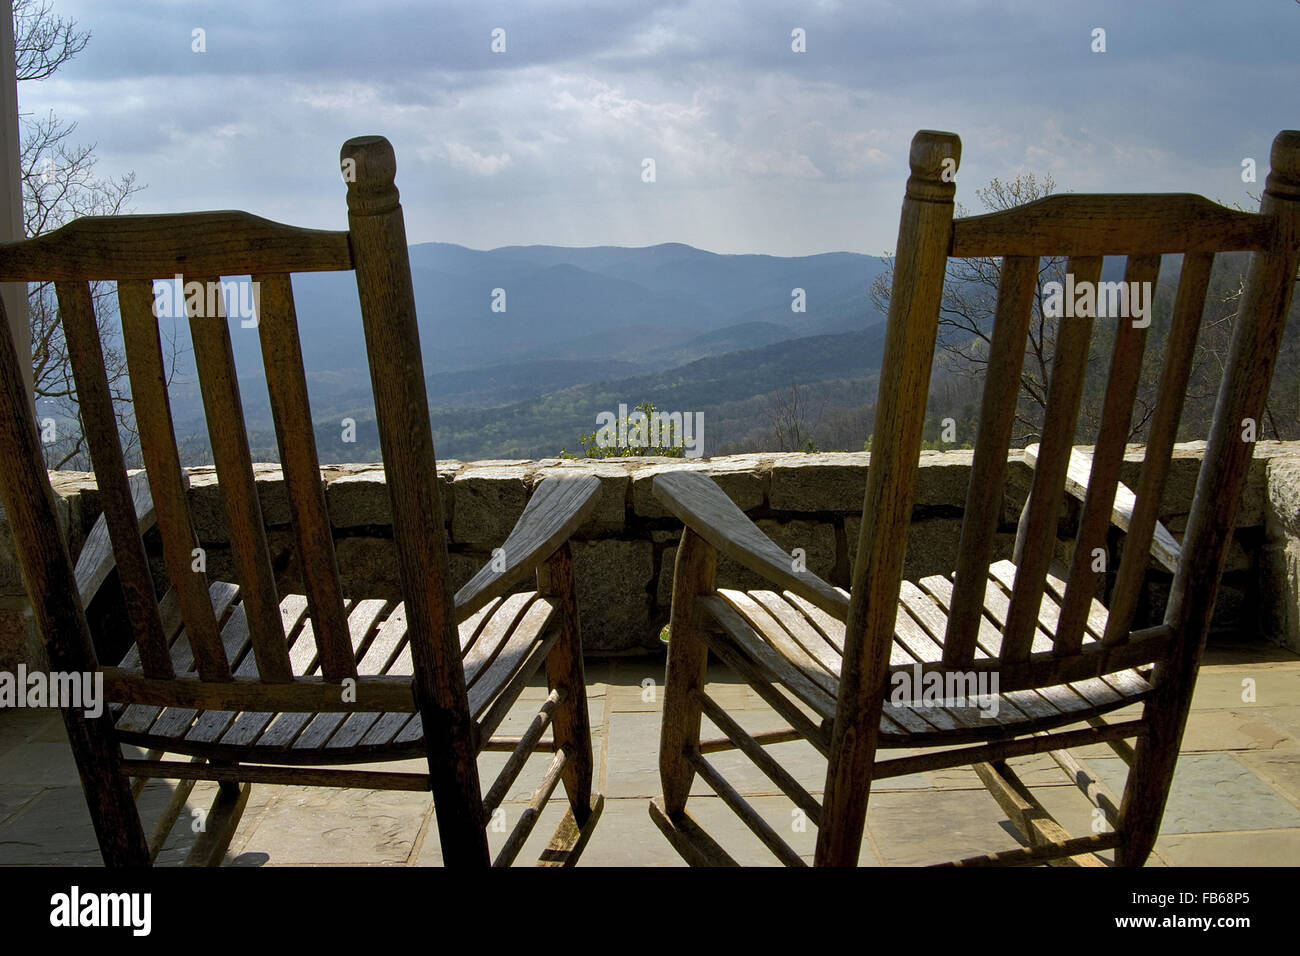 Rocking chairs set on a porch overlooking the Blue Ridge Mountains at Amicalola Falls State Park, Georgia, USA. Stock Photo